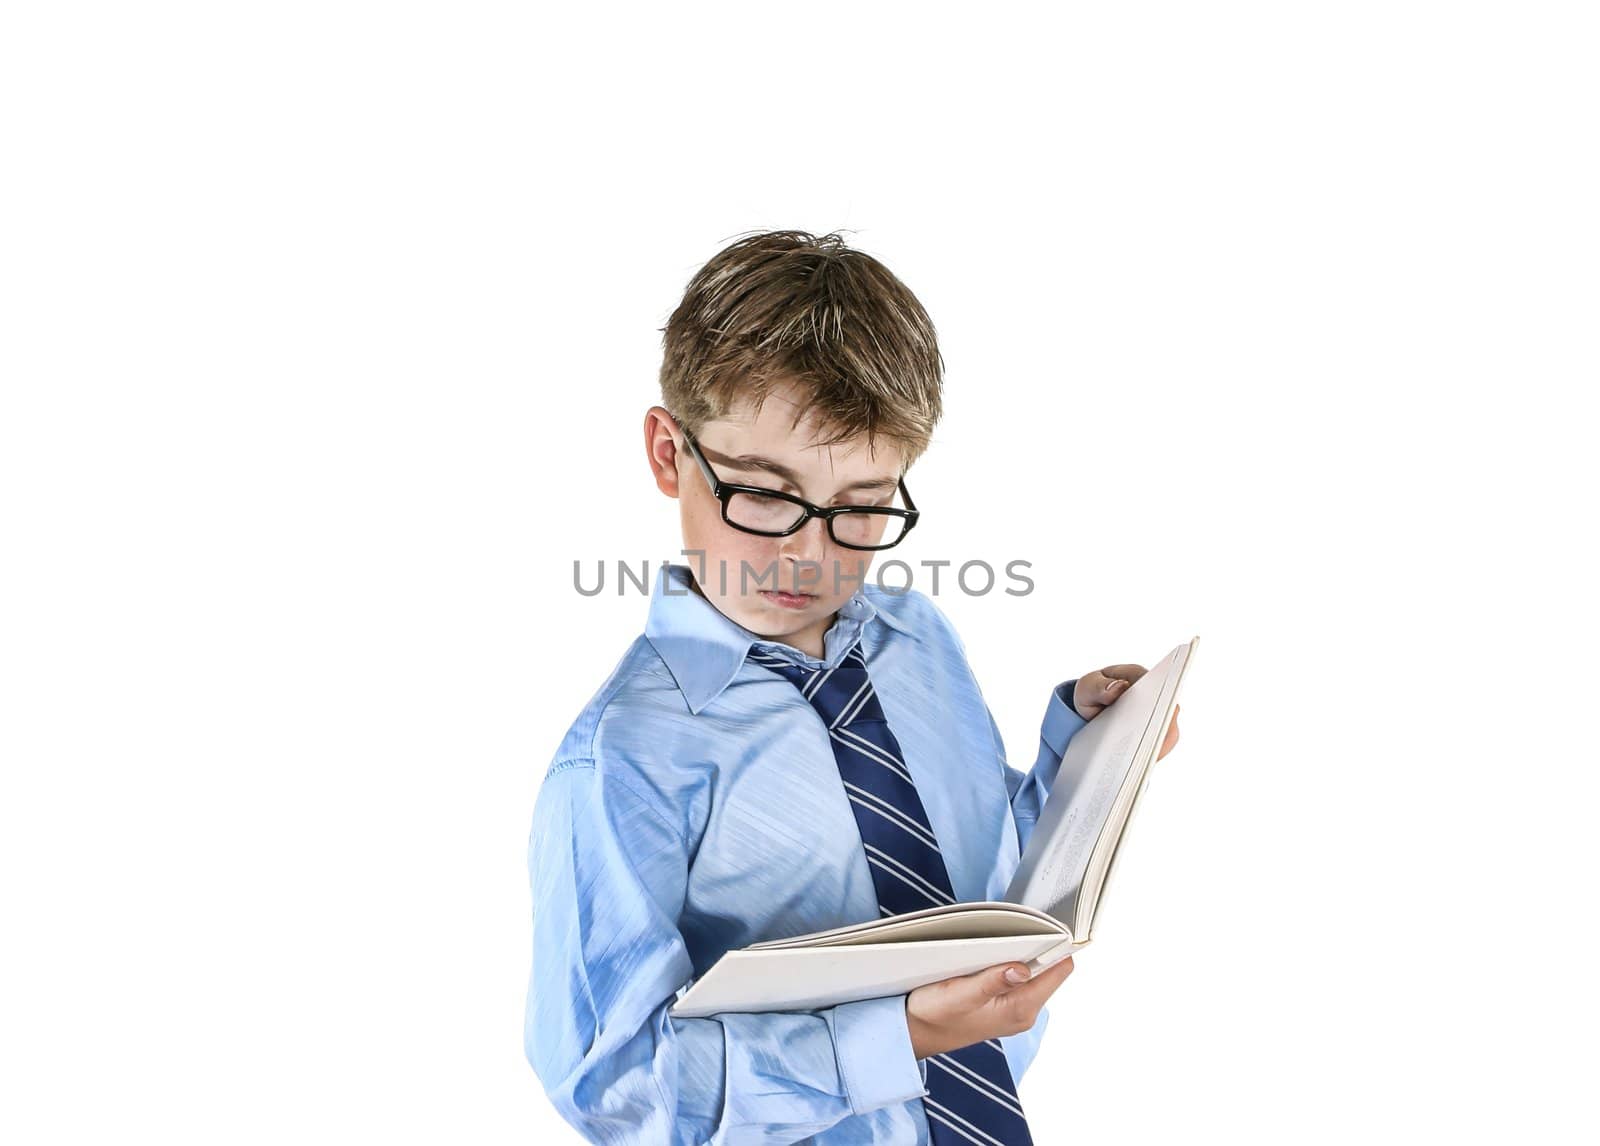 Boy wearing spectacles reading a book.  Please note this image has undergone a digital artistic treatment.